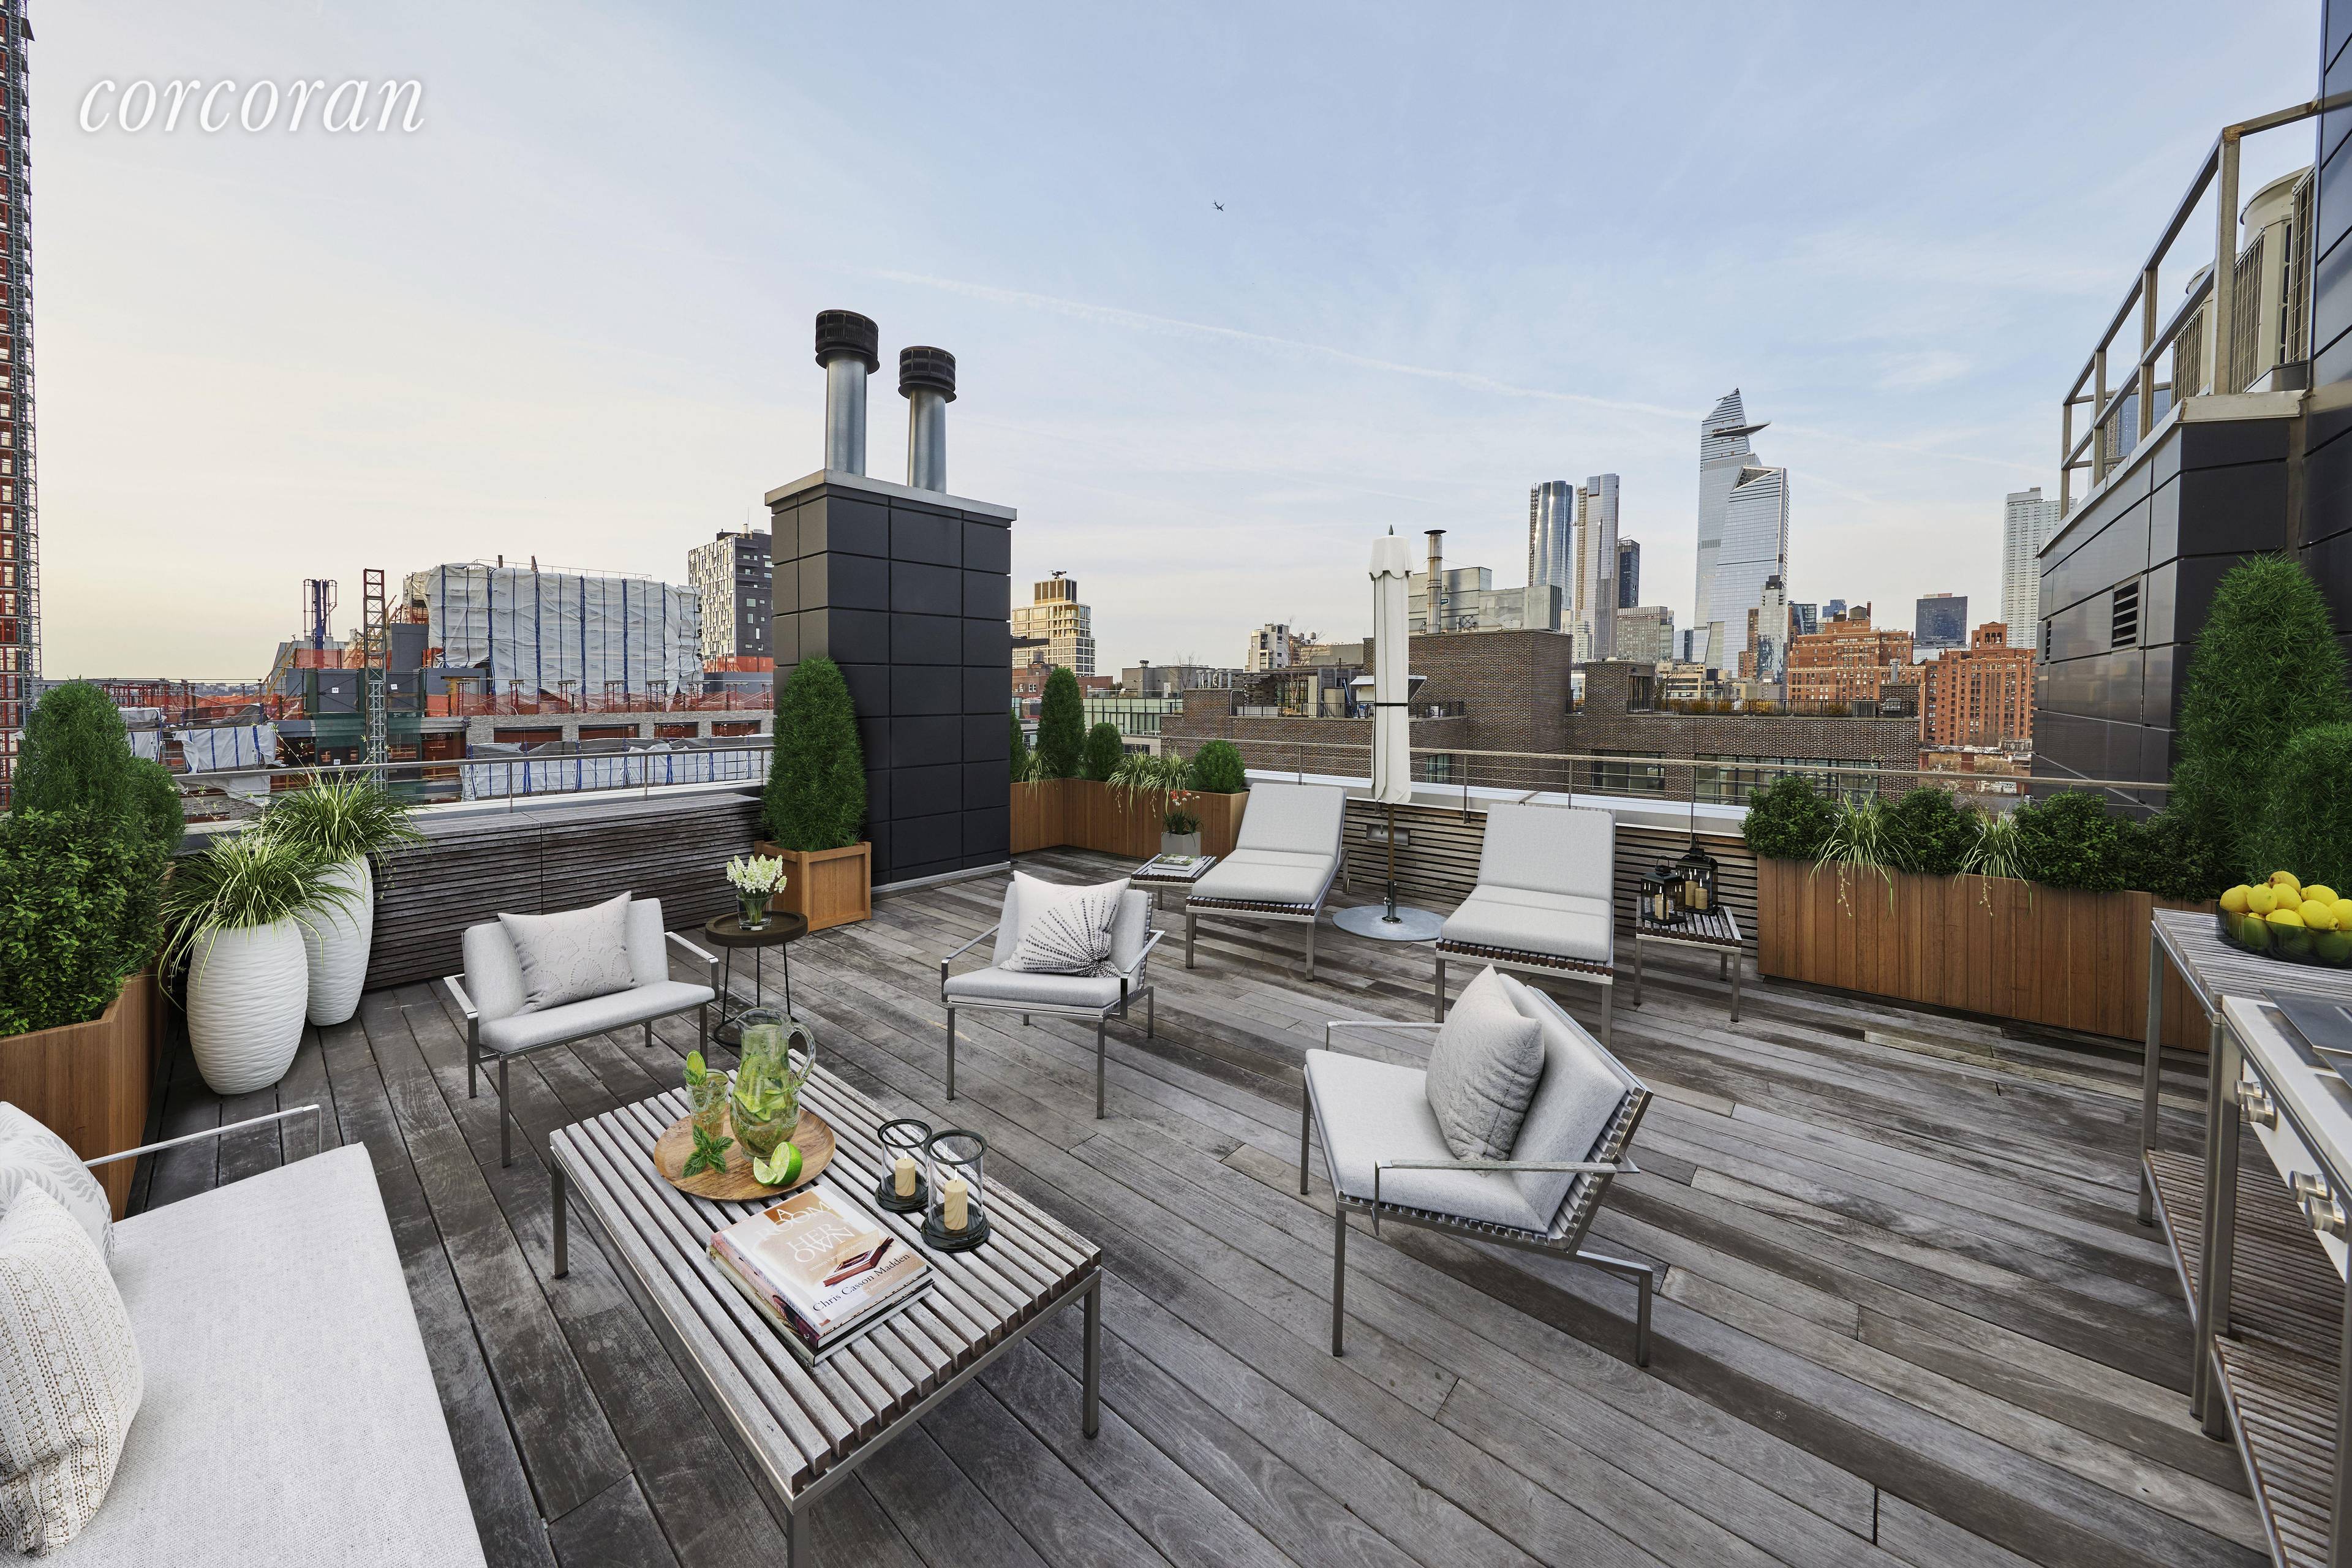 This exceptional, ultra luxurious, triplex penthouse is located at 459 West 18th Street in the heart of West Chelsea, overlooking the Highline Park.